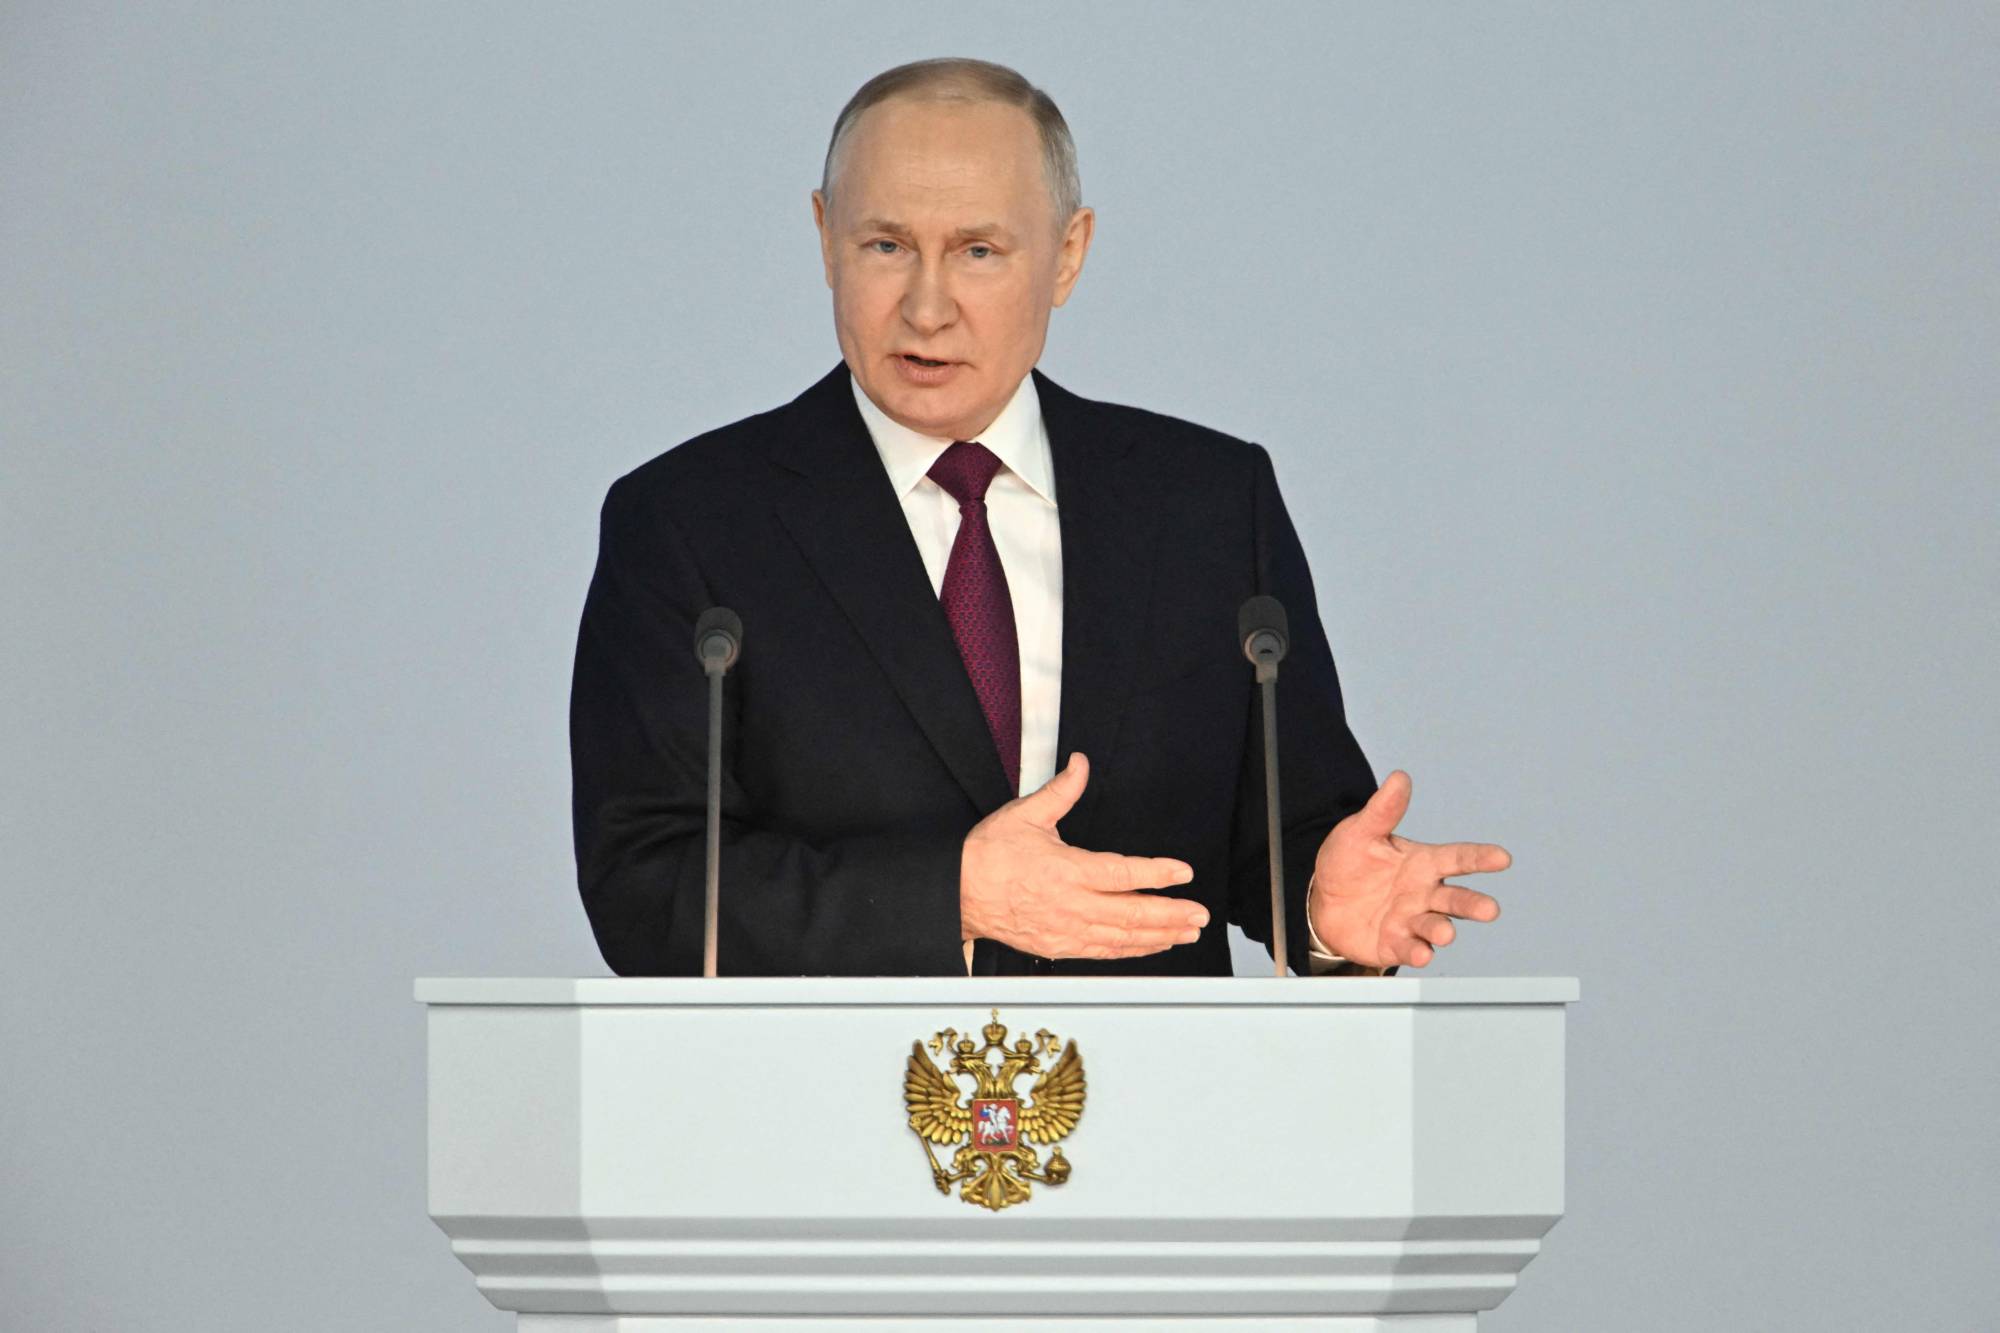 Russian President Vladimir Putin delivers his annual state of the nation address at the Gostiny Dvor conference center in Moscow on Tuesday. | SPUTNIK / VIA AFP-JIJI